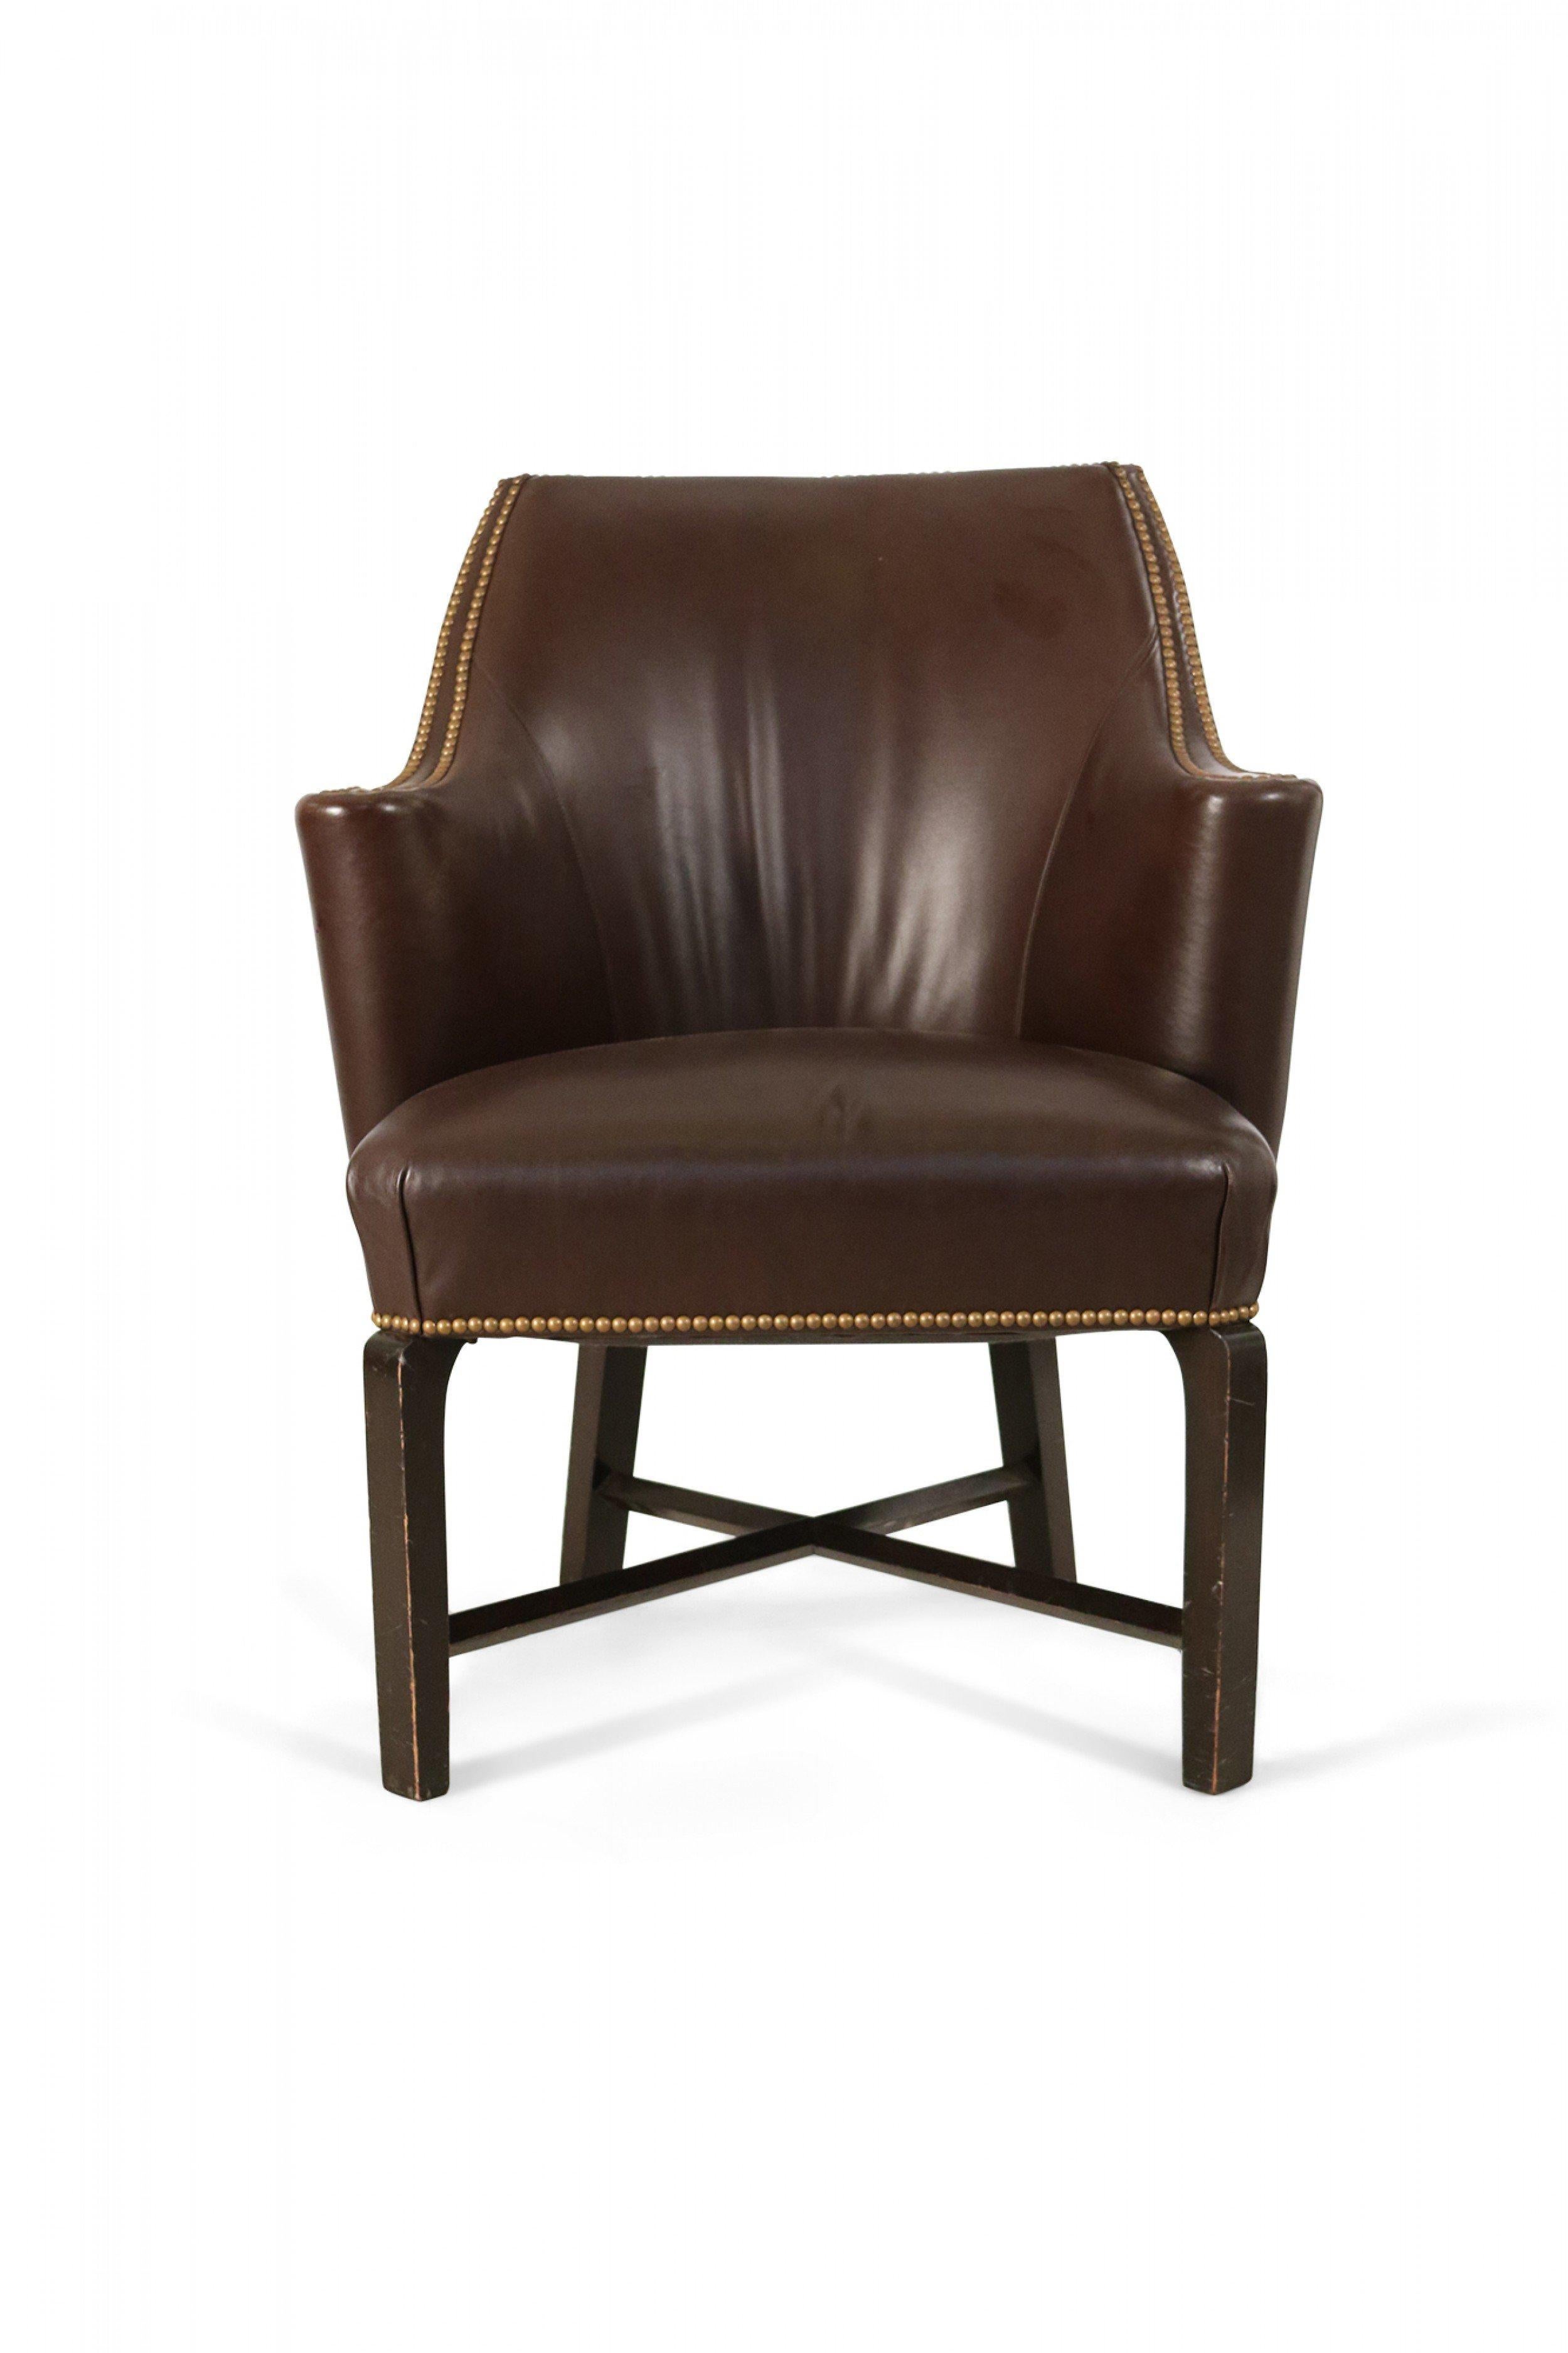 Pair of Contemporary brown leather club / armchairs with rounded backs, black painted wooden legs with an x-shaped stretcher, and brass upholstery nail detail. (PRICED AS PAIR).